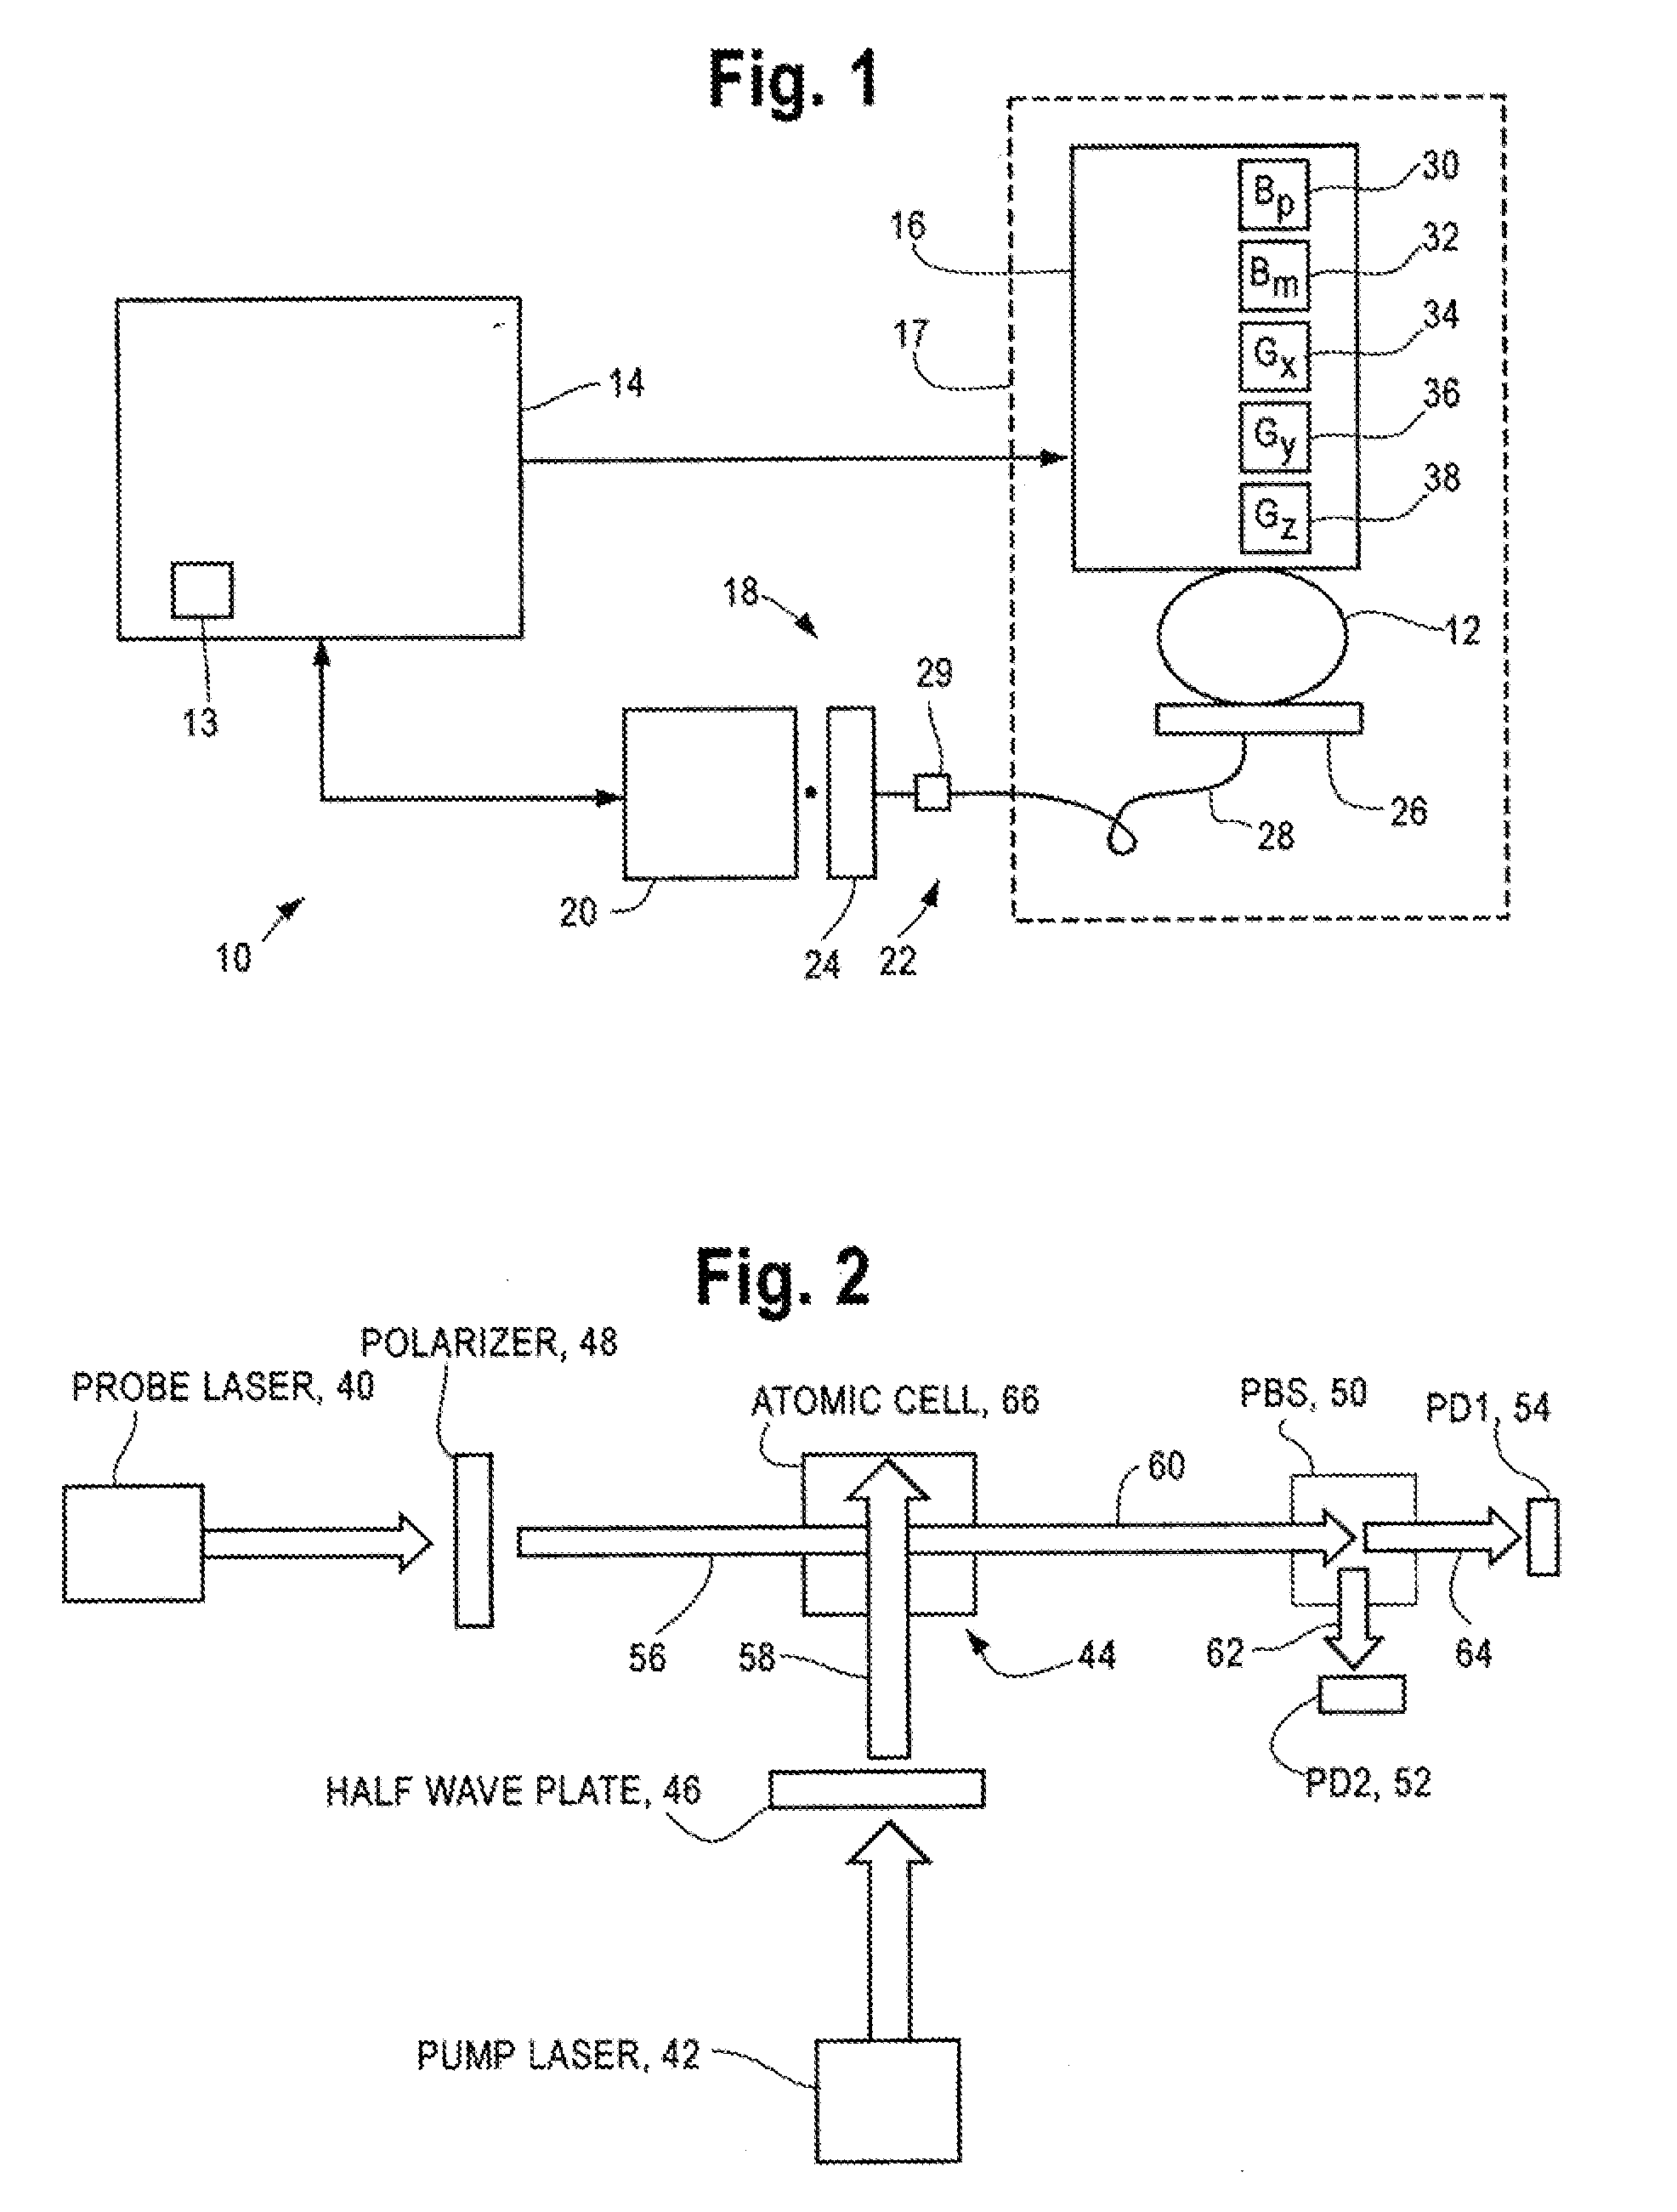 Method of performing MRI with an atomic magnetometer